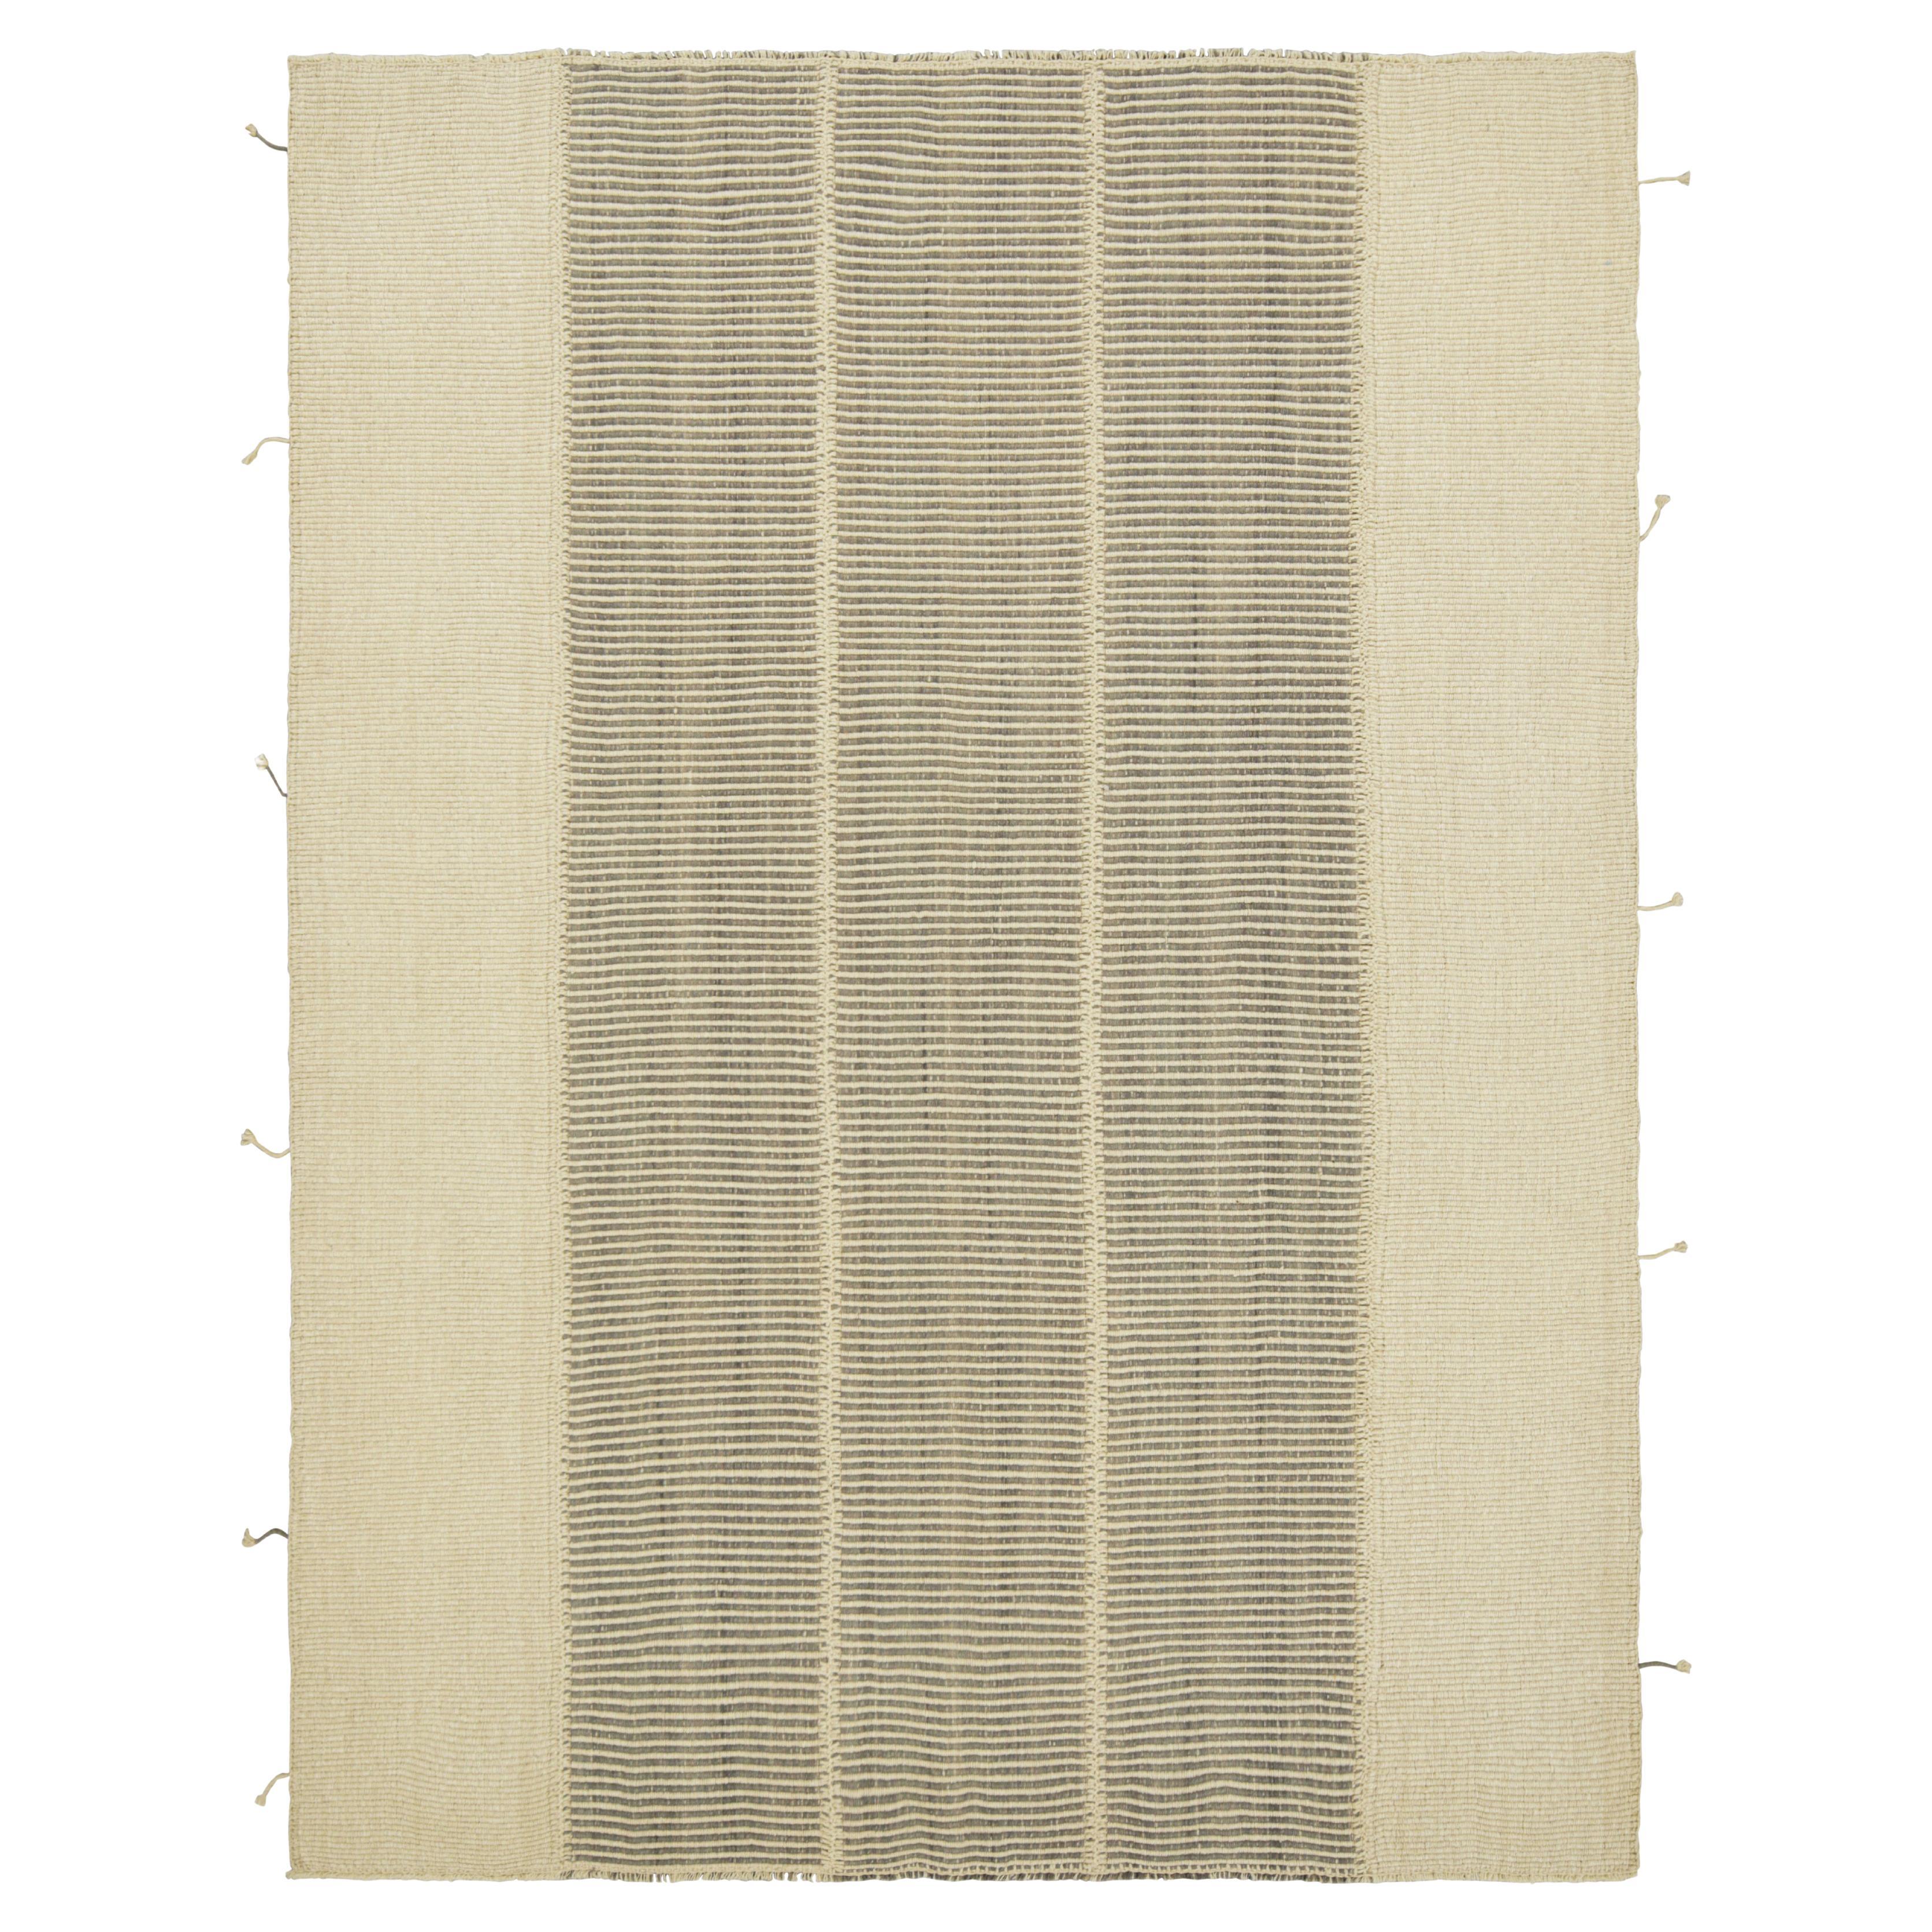 Rug & Kilim’s Contemporary Kilim in Beige and Gray Textural Stripes For Sale